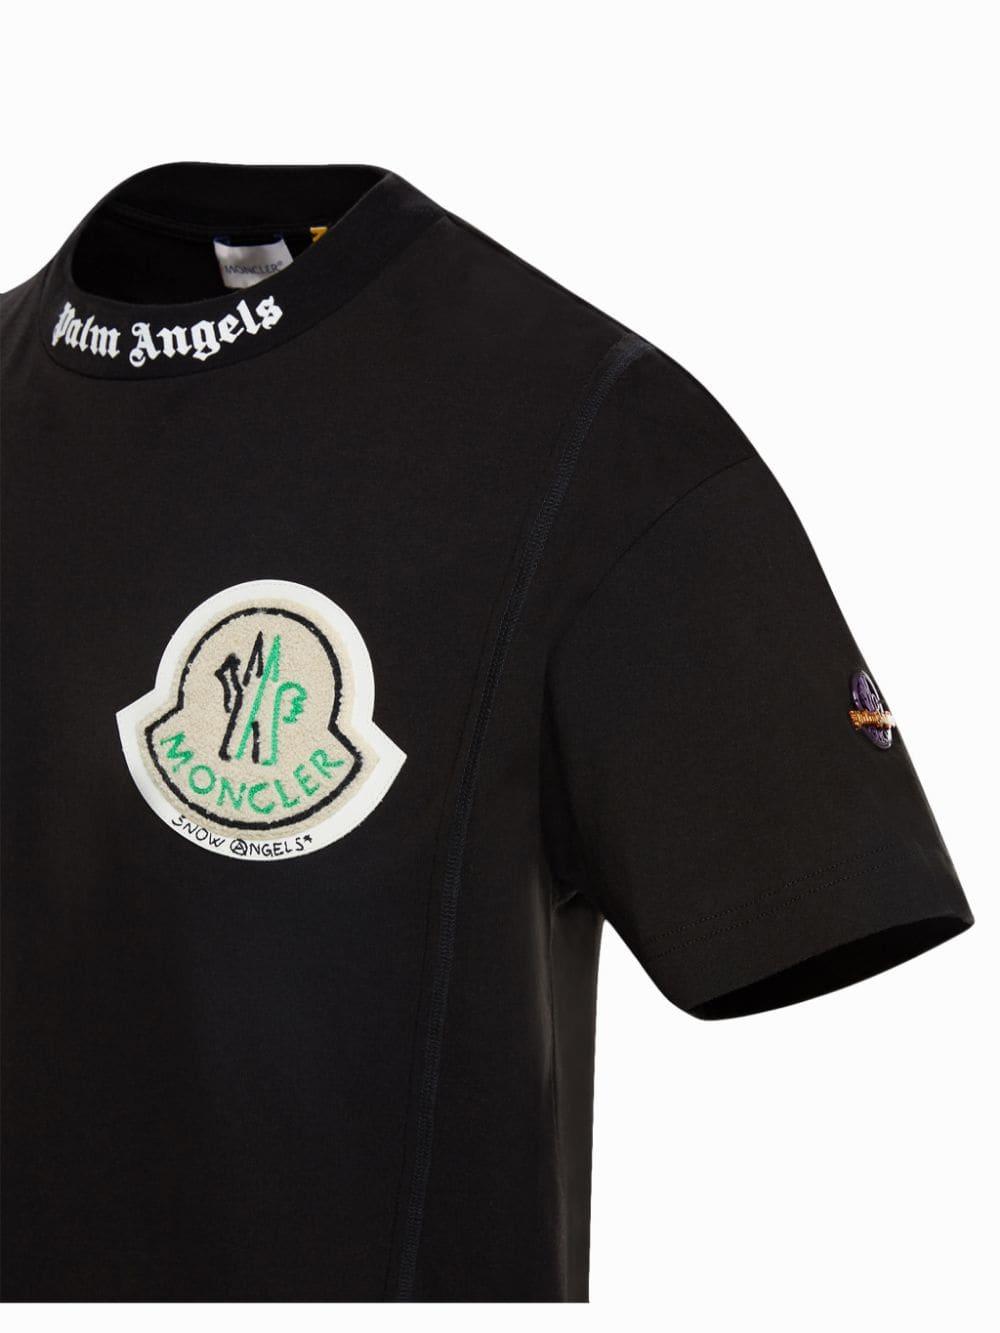 Palm Angels X Moncler Tee Luxembourg, SAVE 44% - www.fourwoodcapital.com